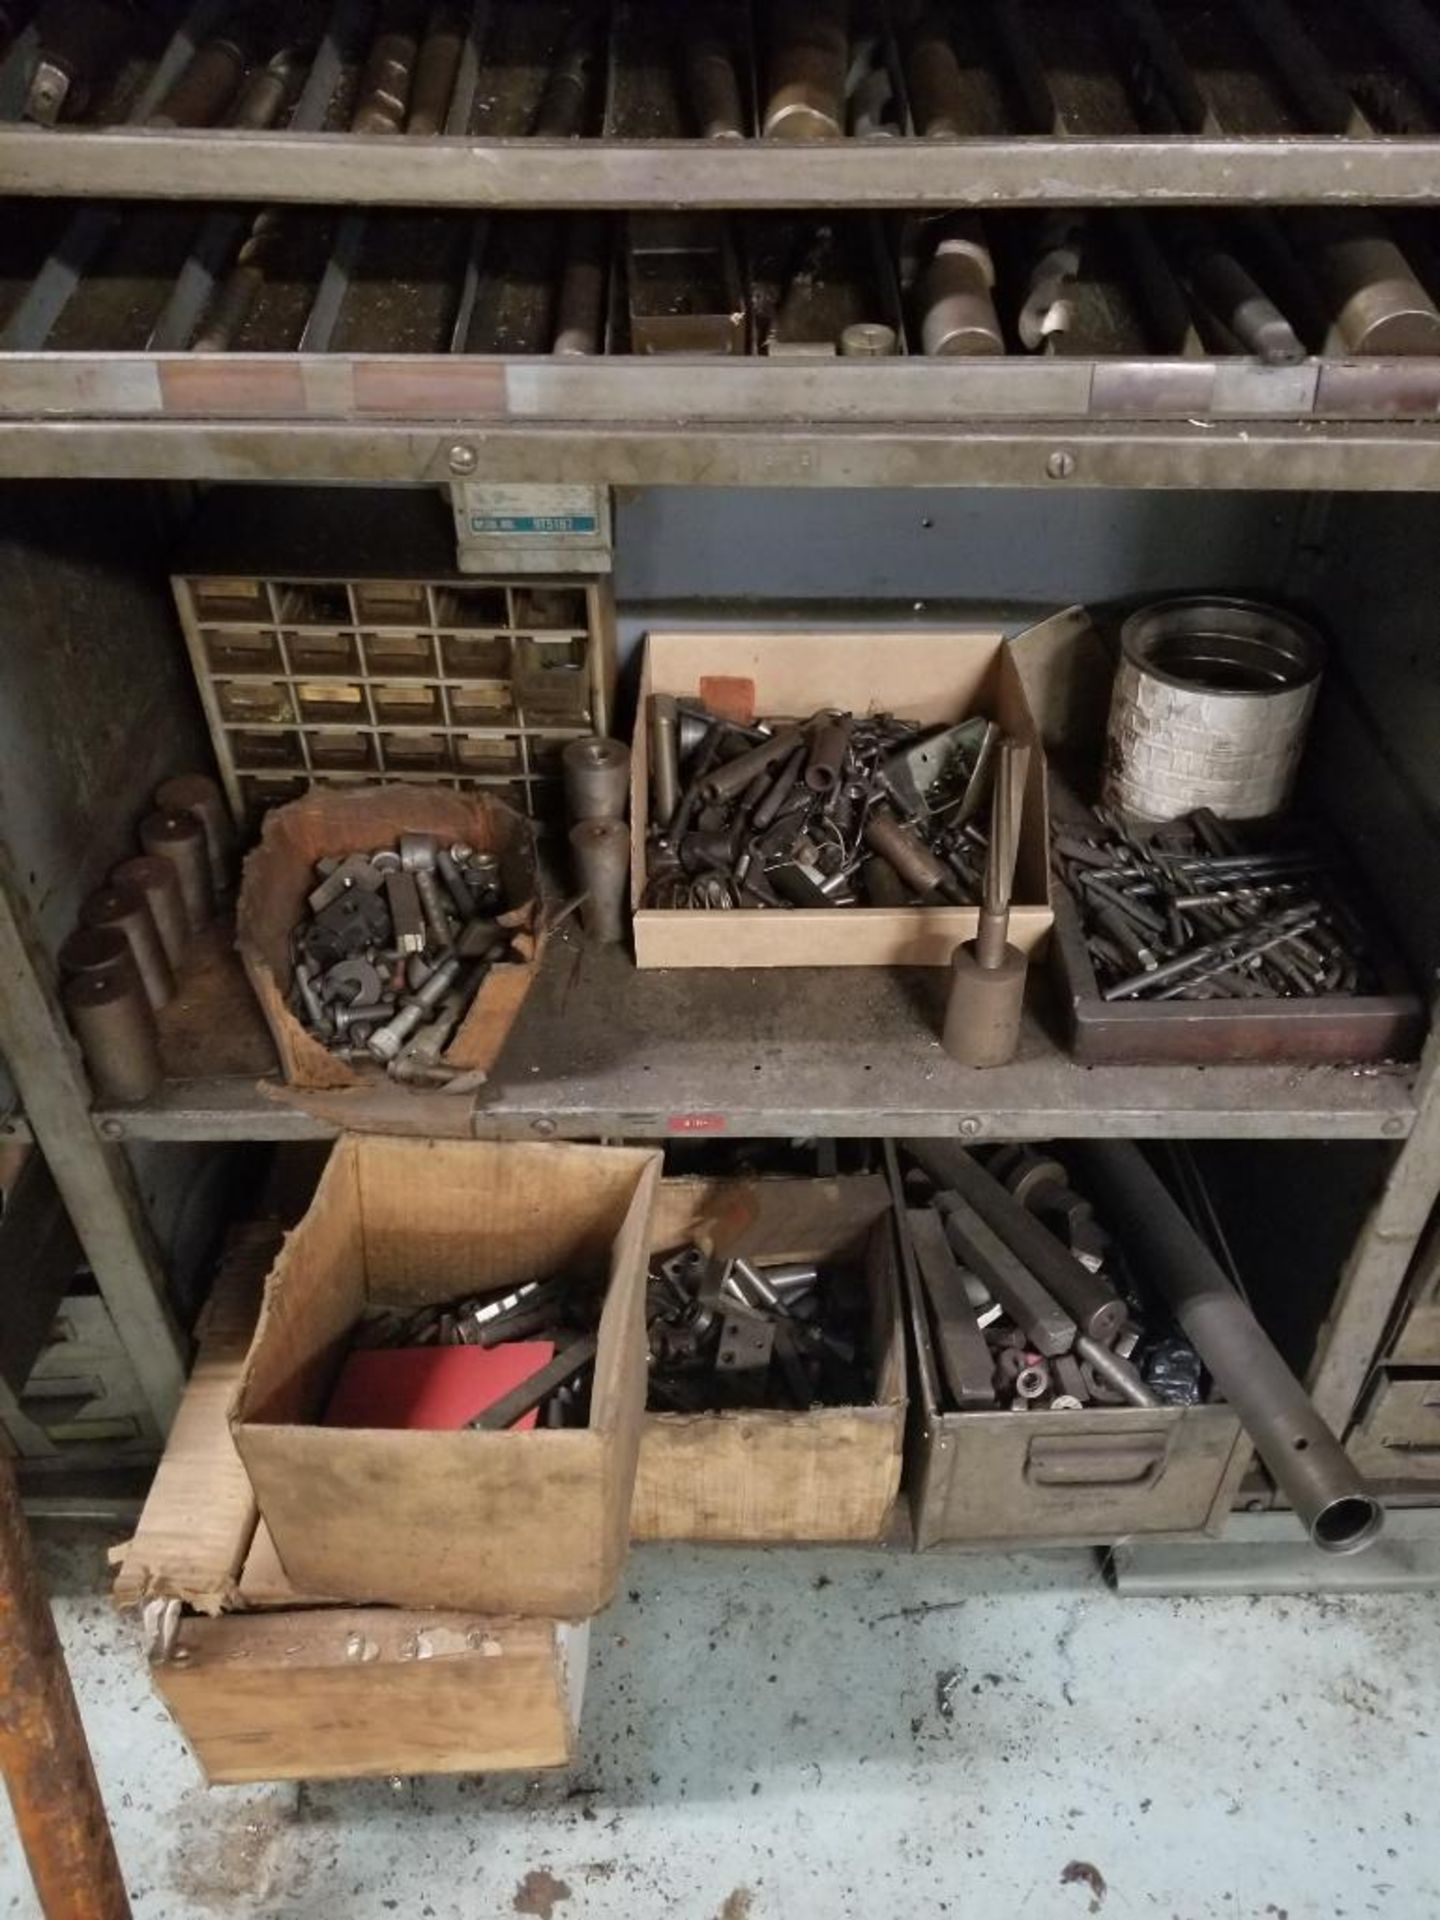 Drill index shelf with all drills as pictured. This lot is for one vertical section pictured.